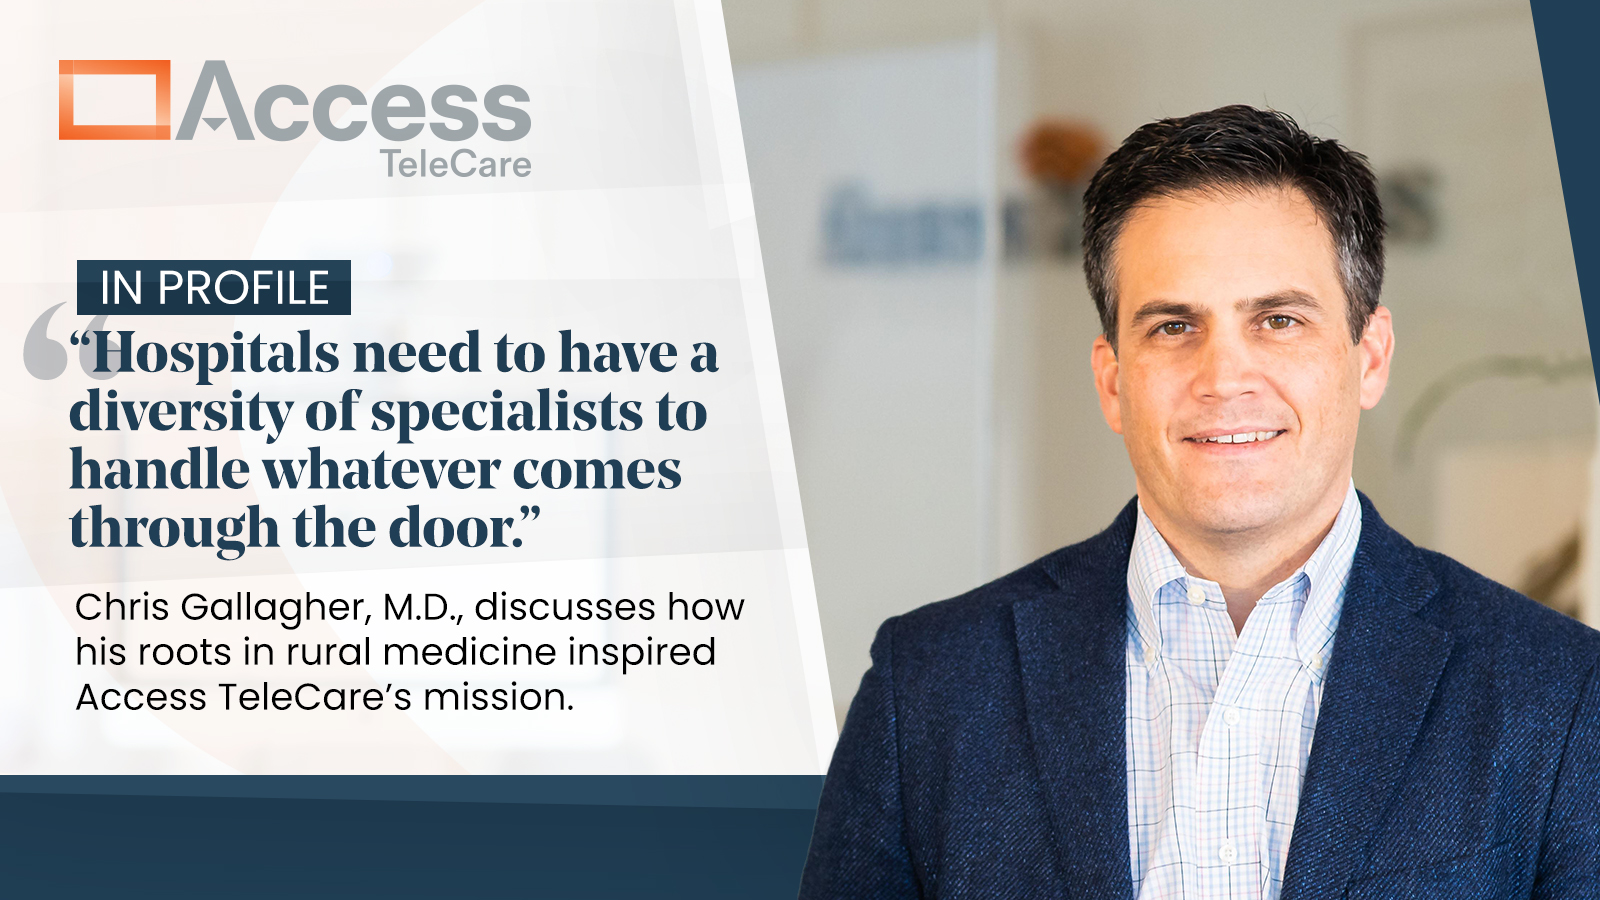 Quote from Access TeleCare president/CEO Chris Gallagher, M.D., on how his rural roots inspired Access TeleCare's telemedicine mission